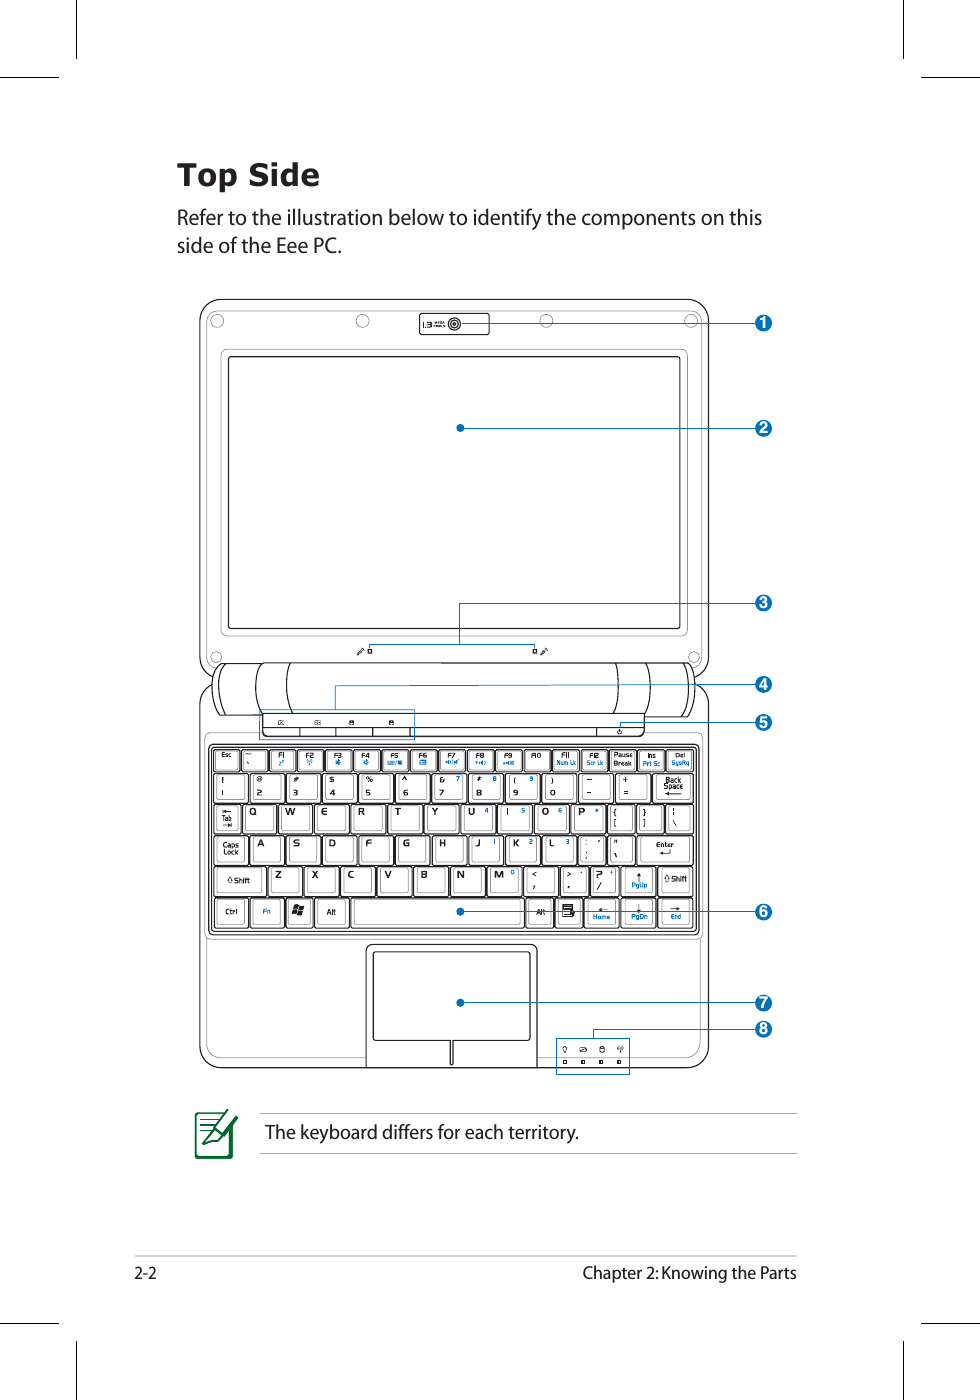 2-2Chapter 2: Knowing the PartsTop SideRefer to the illustration below to identify the components on this side of the Eee PC.The keyboard differs for each territory.23167584